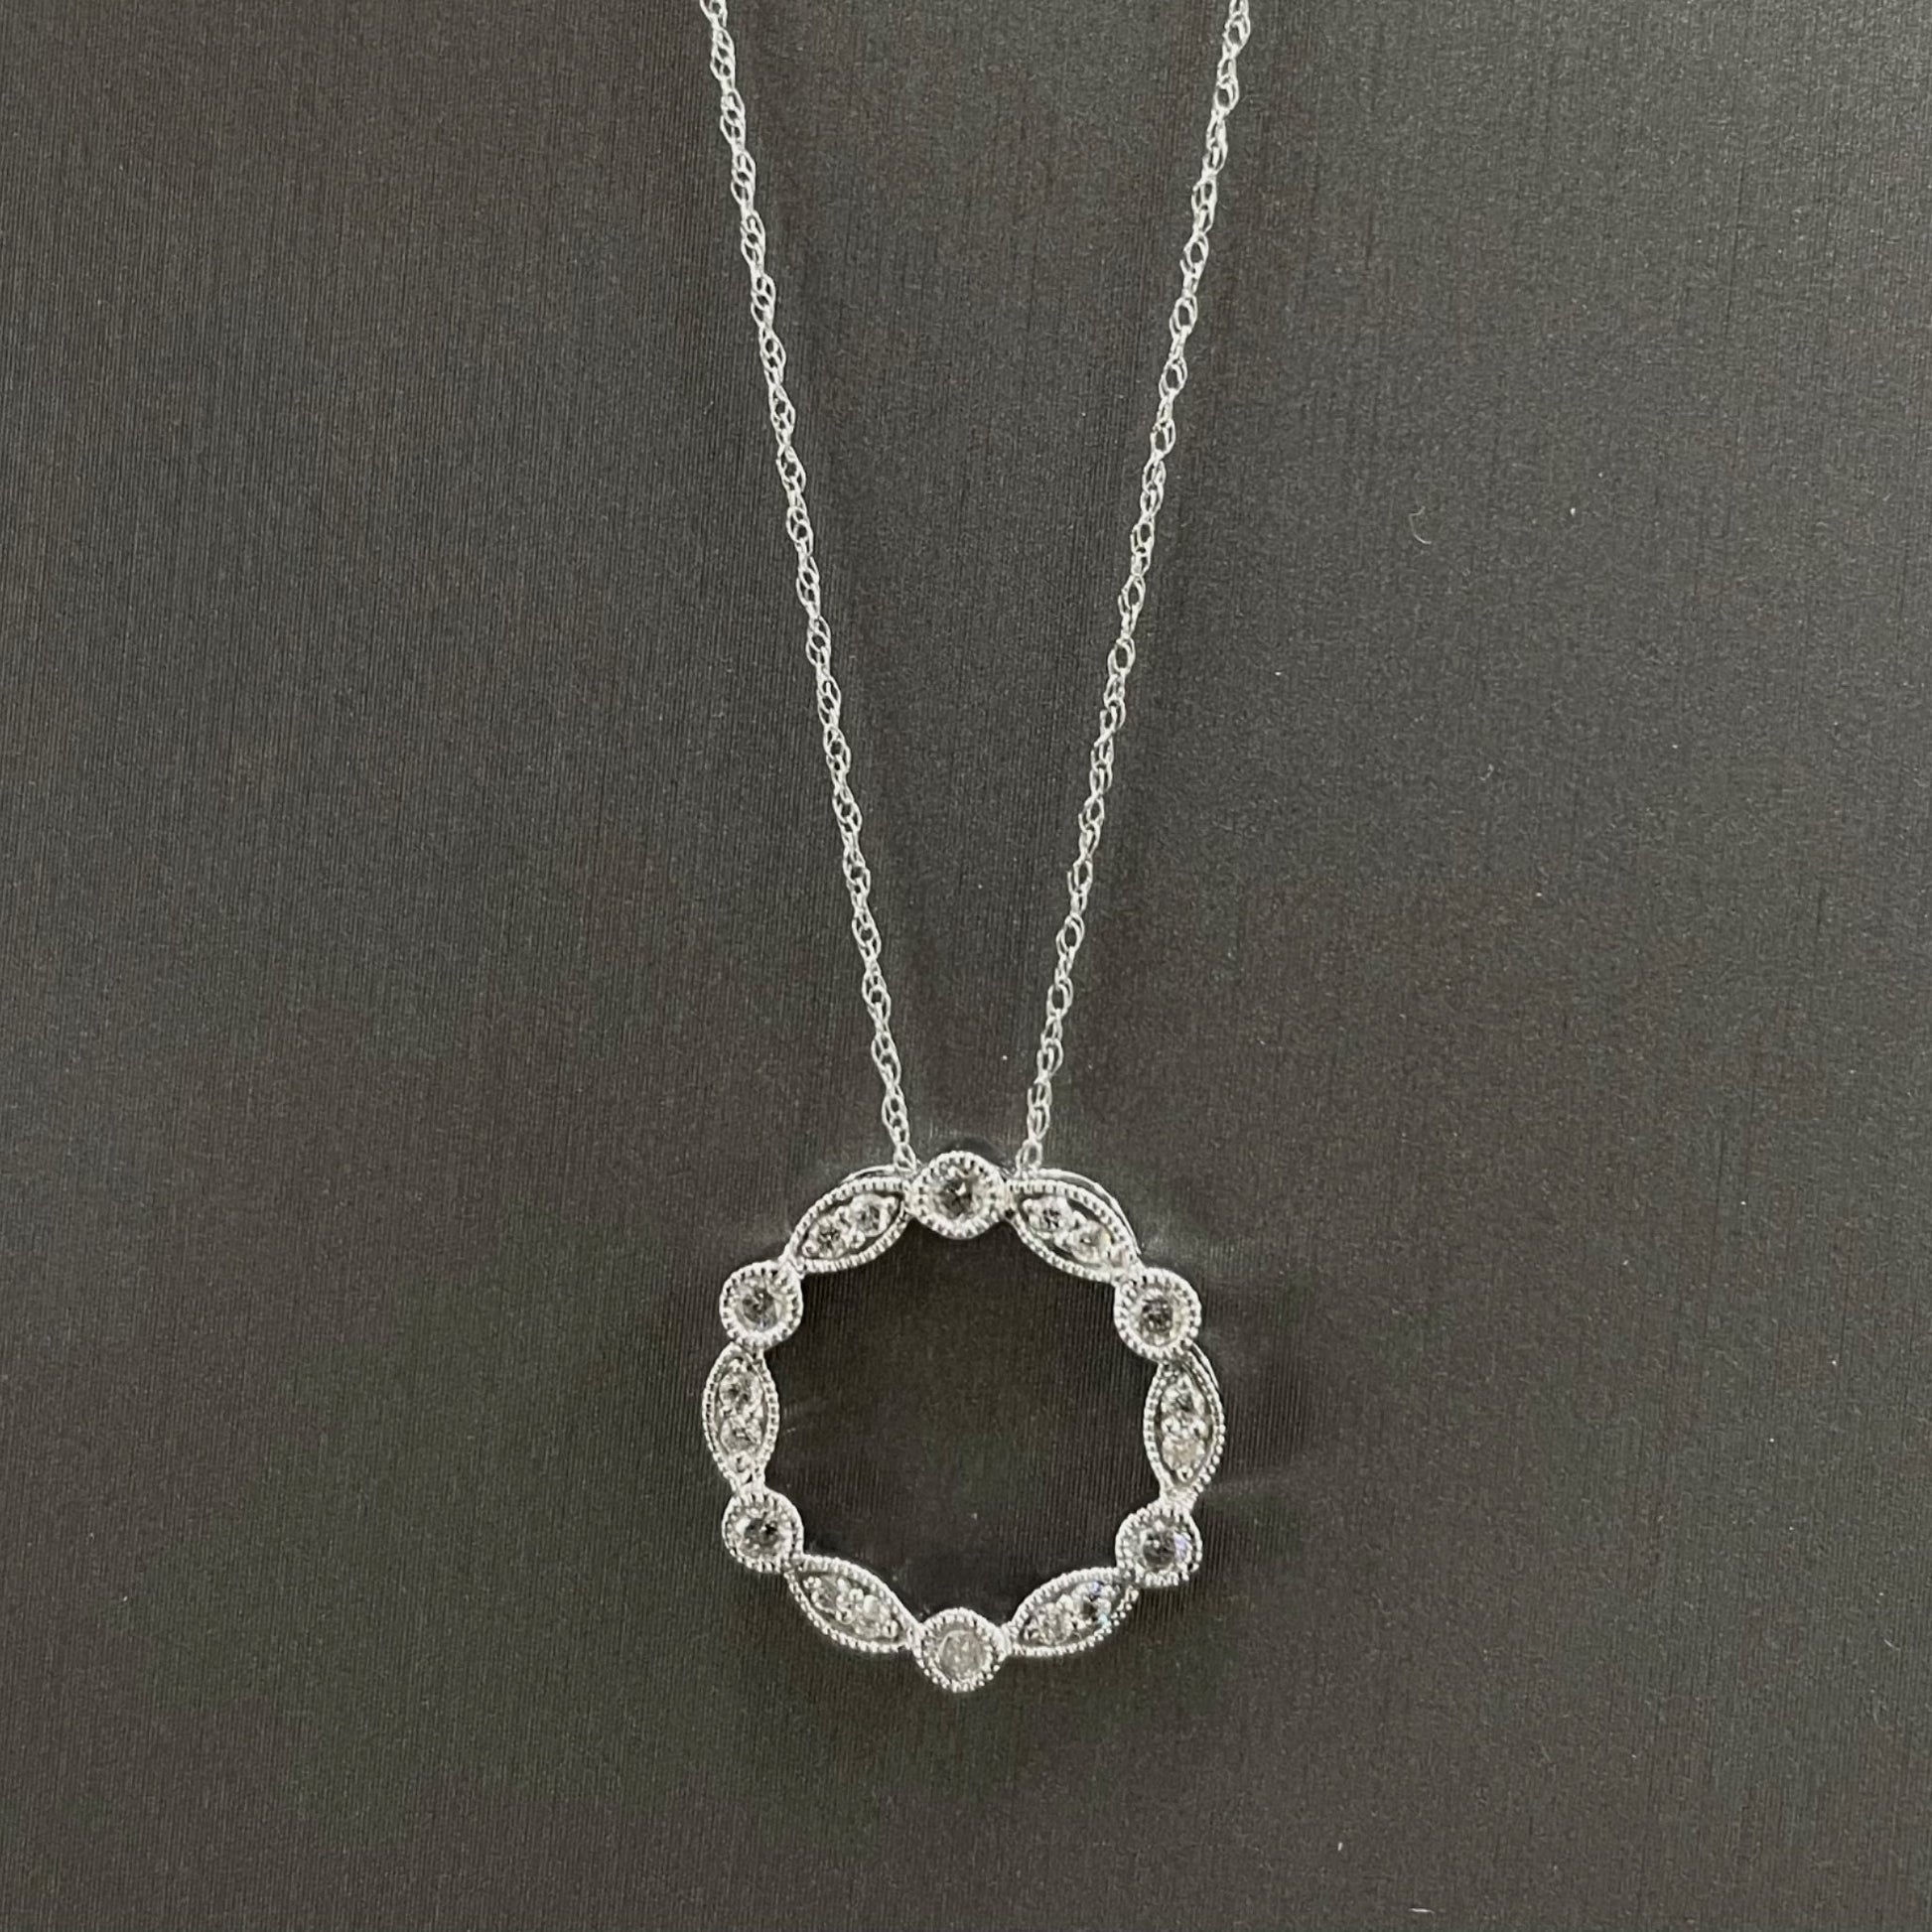 White Gold And Diamond Vintage Inspired Circle Necklace